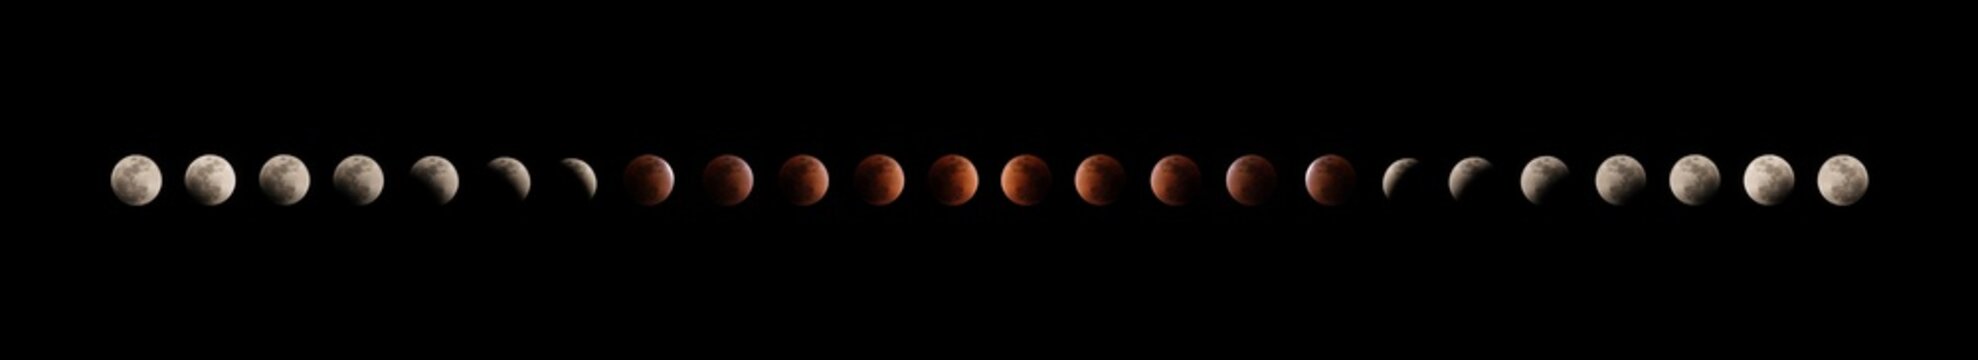 different phases of total lunar eclipse on dark sky